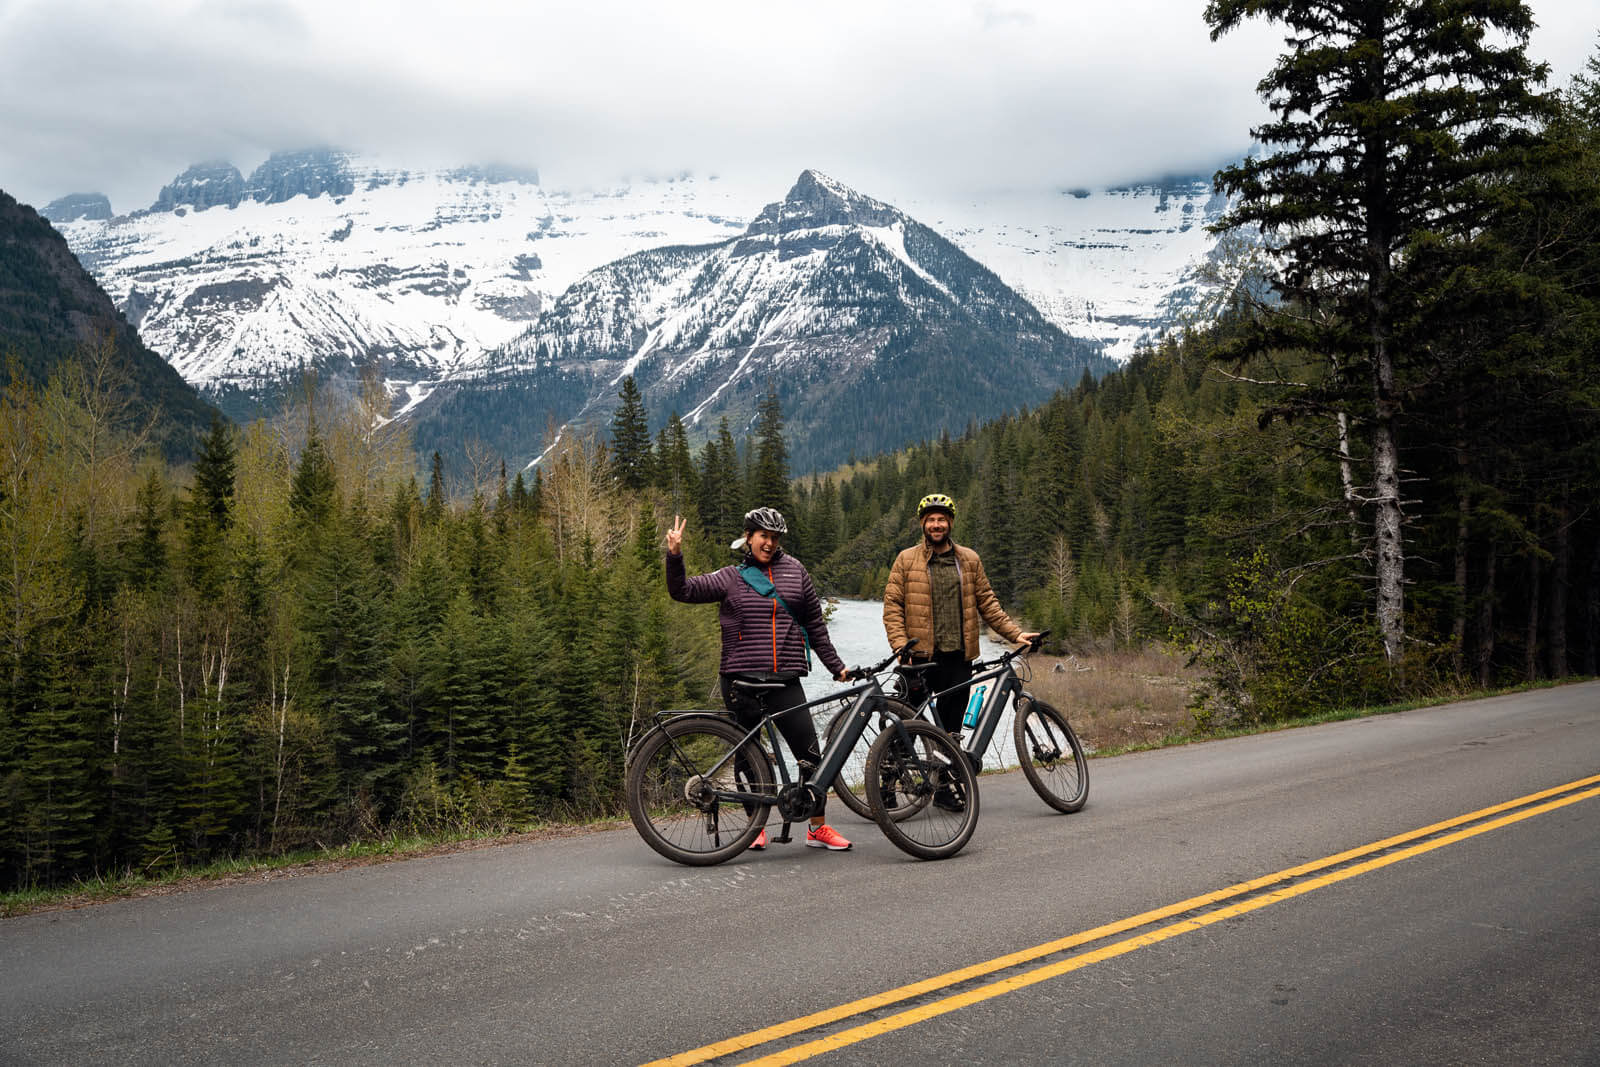 Megan and Scott having fun biking the Going-to-the-Sun Road in Glacier National Park